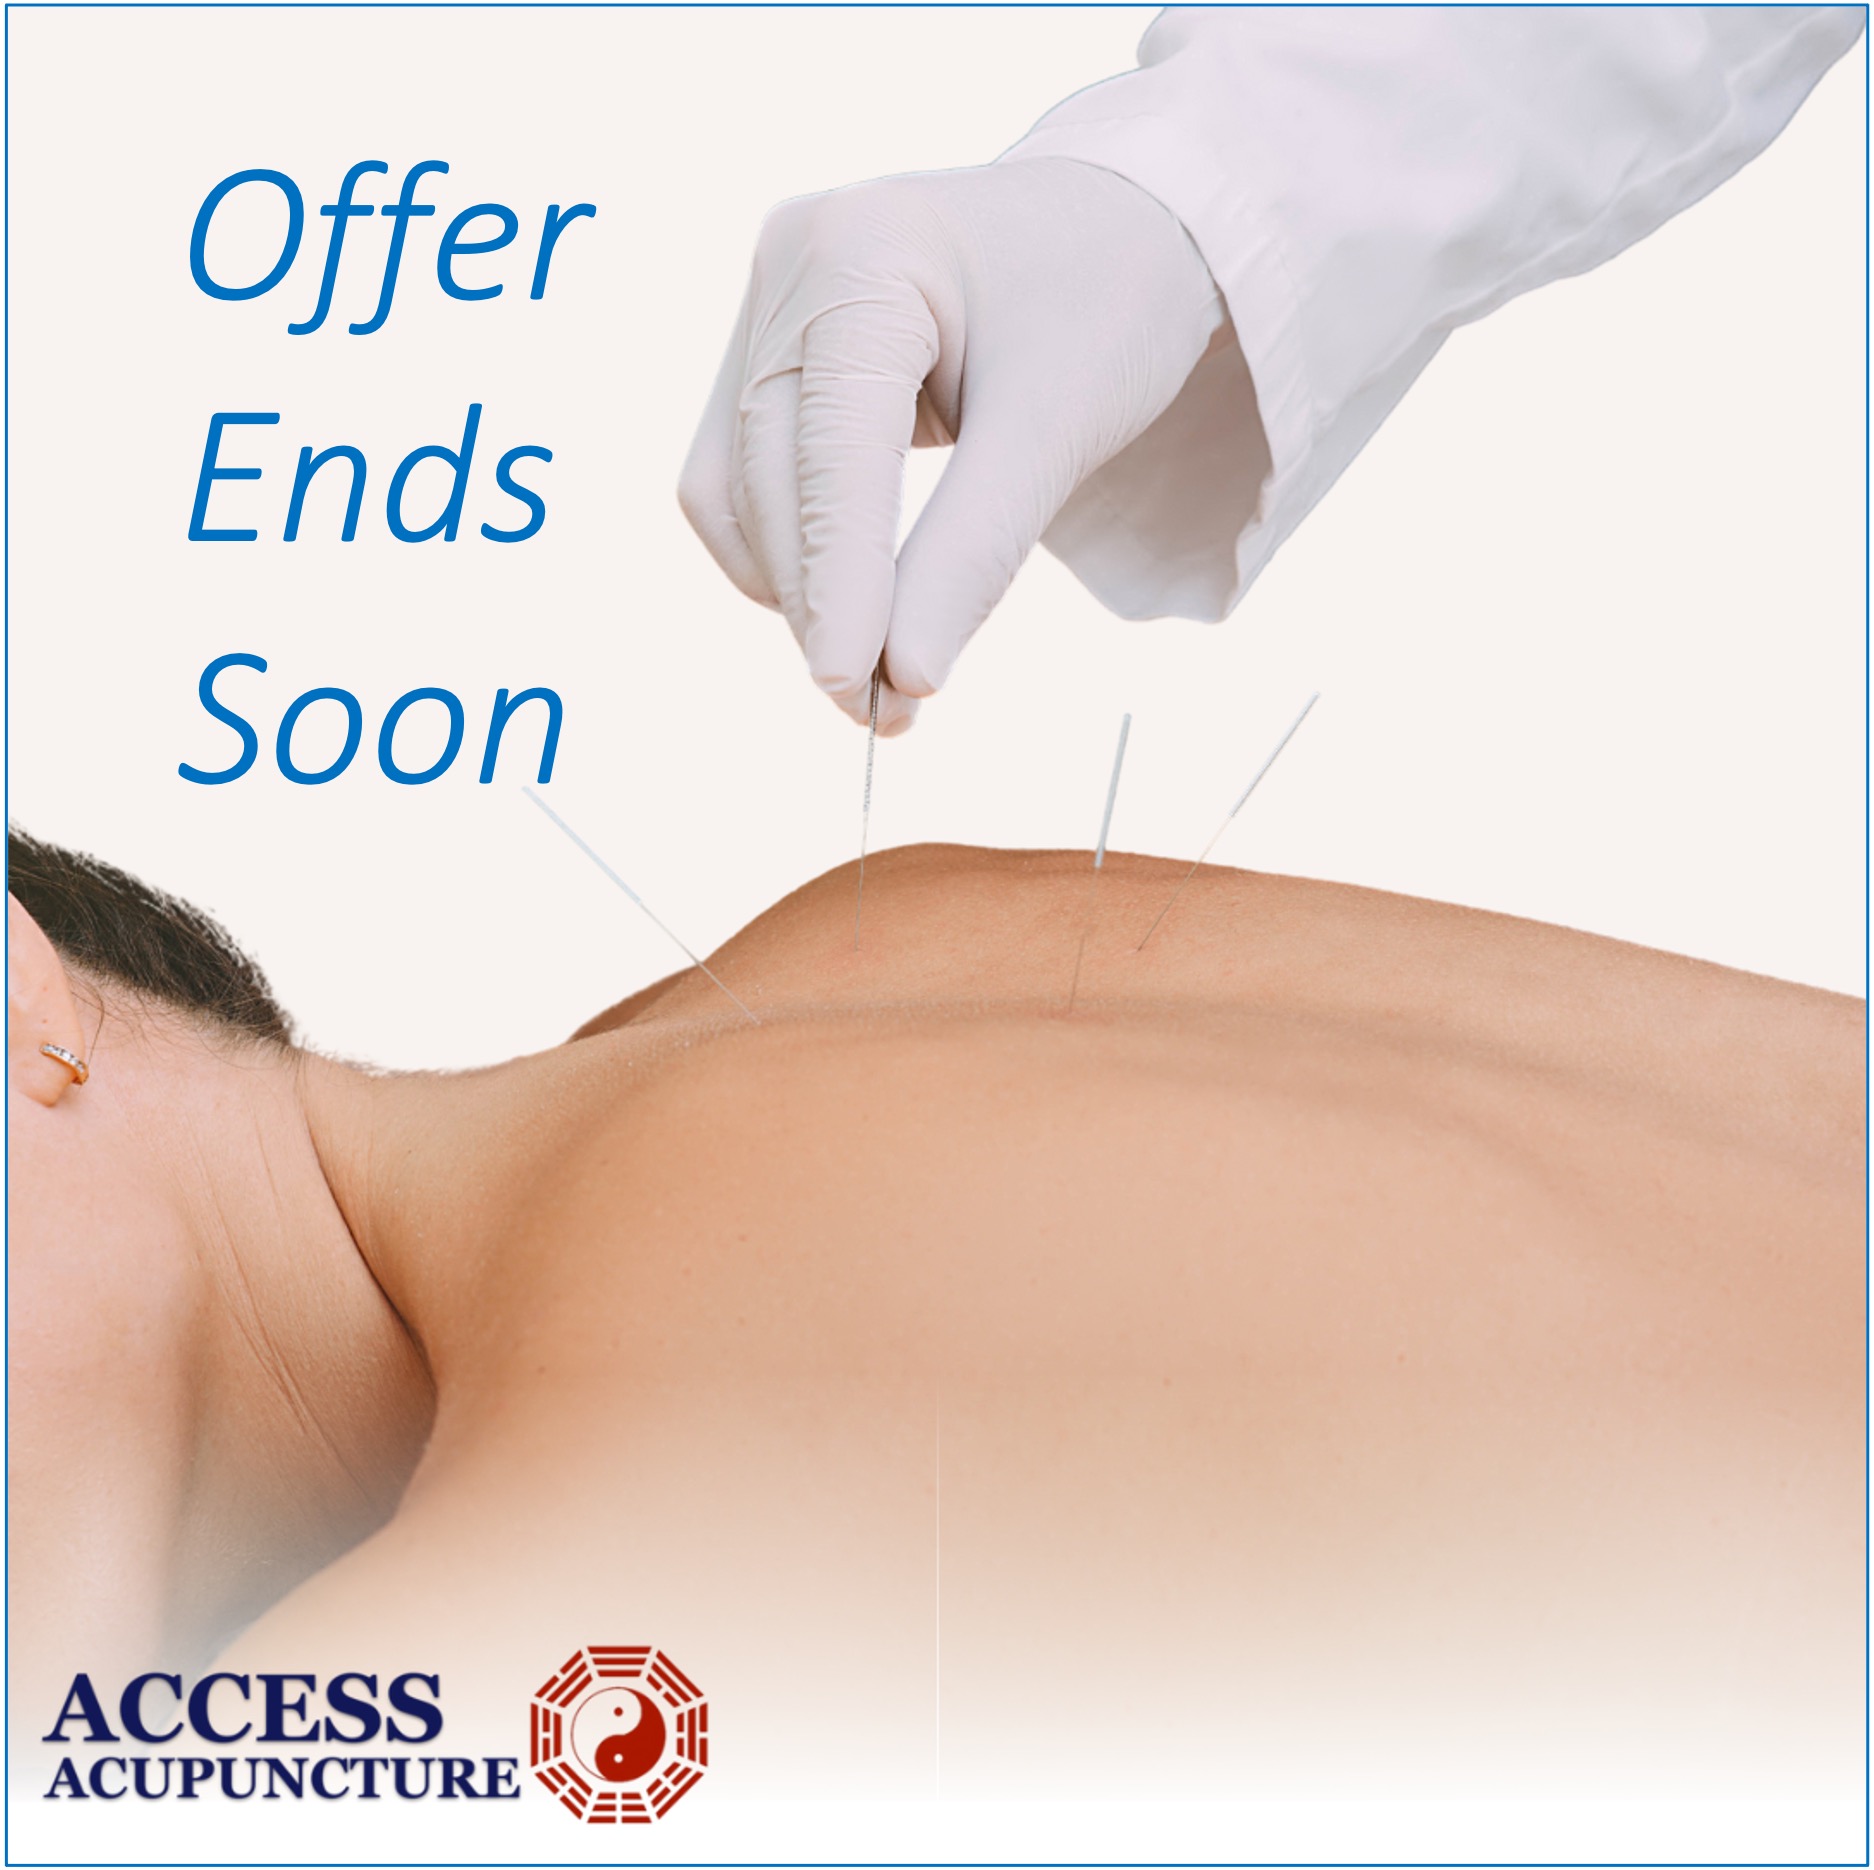 vStore Access Acupuncture Offer Ends Soon image